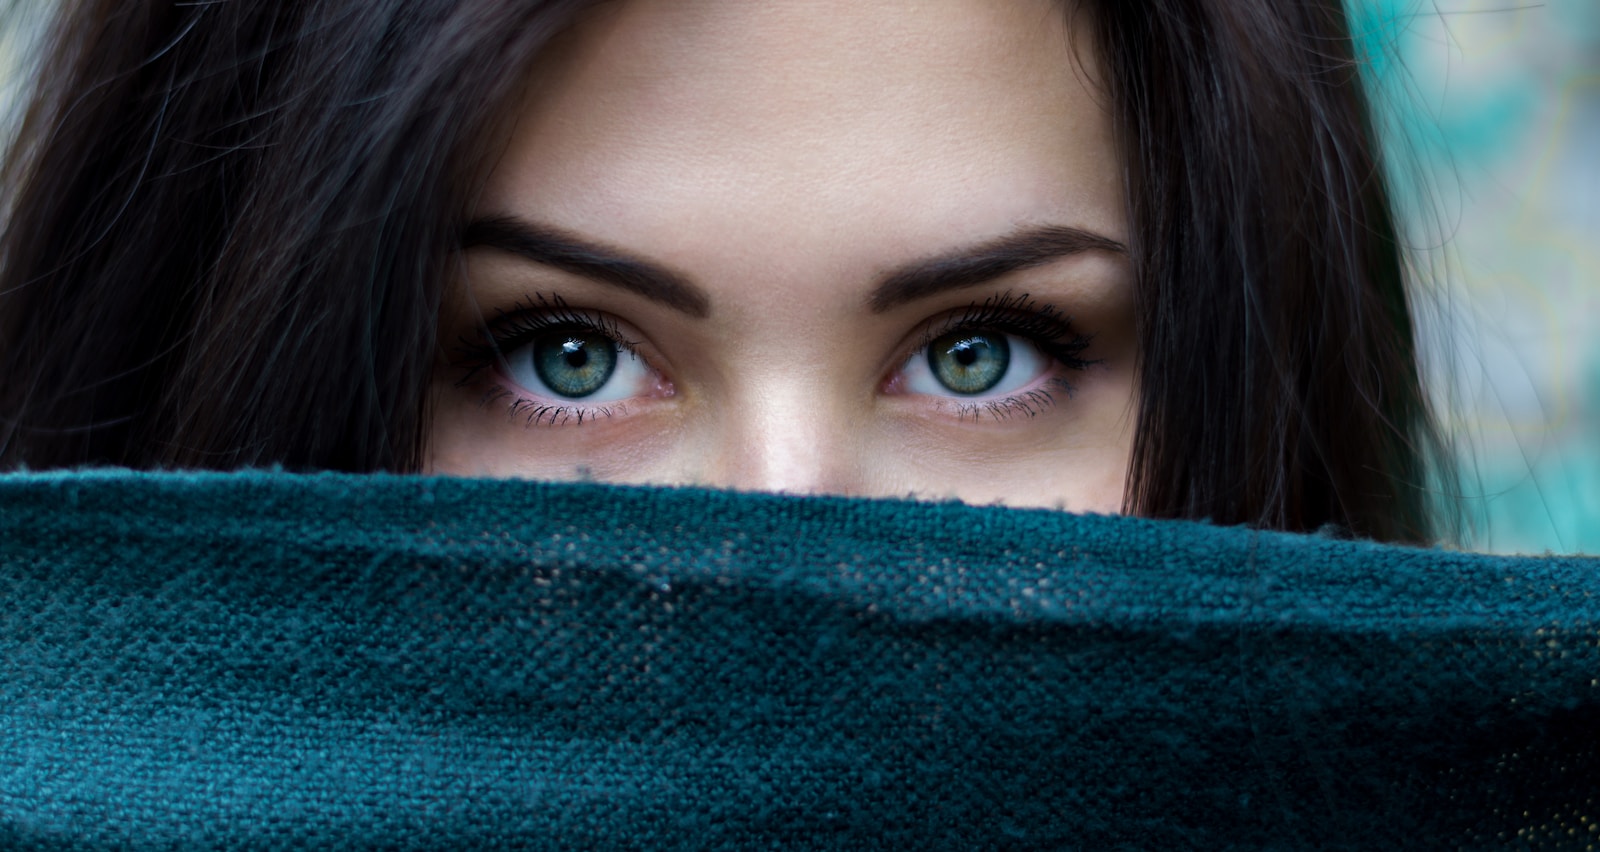 a close up of a person with blue eyes